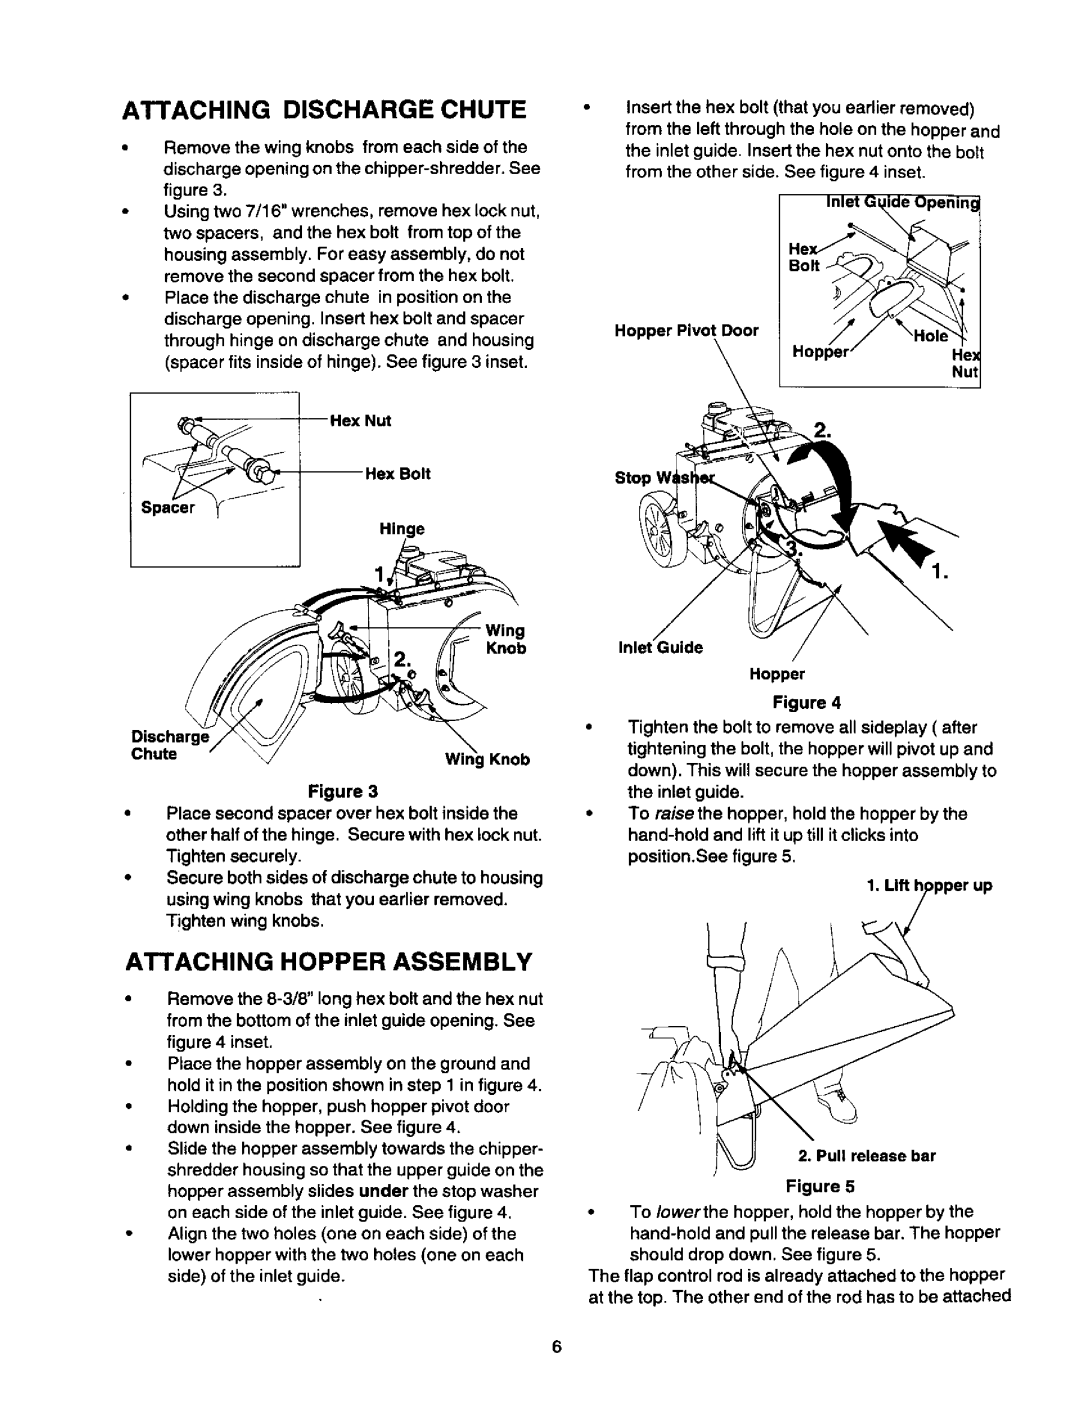 Craftsman 247.775870 owner manual Attaching Discharge Chute, Attaching Hopper Assembly 